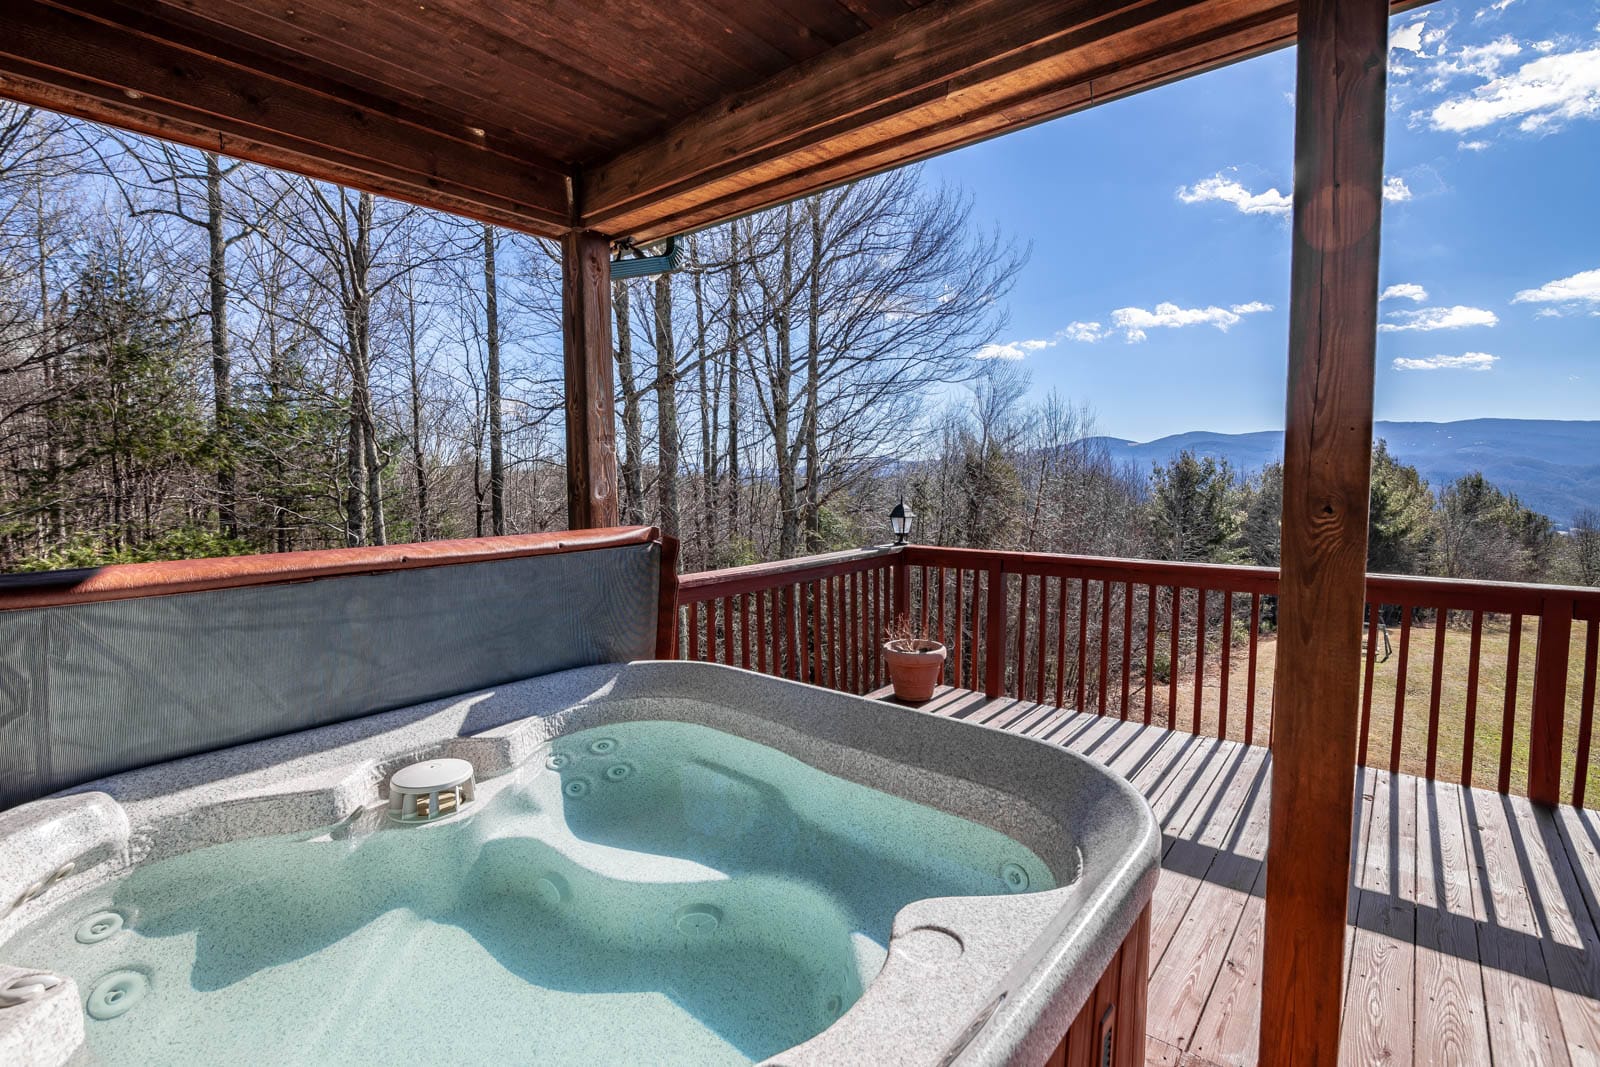 Hot Tub on the Covered Deck